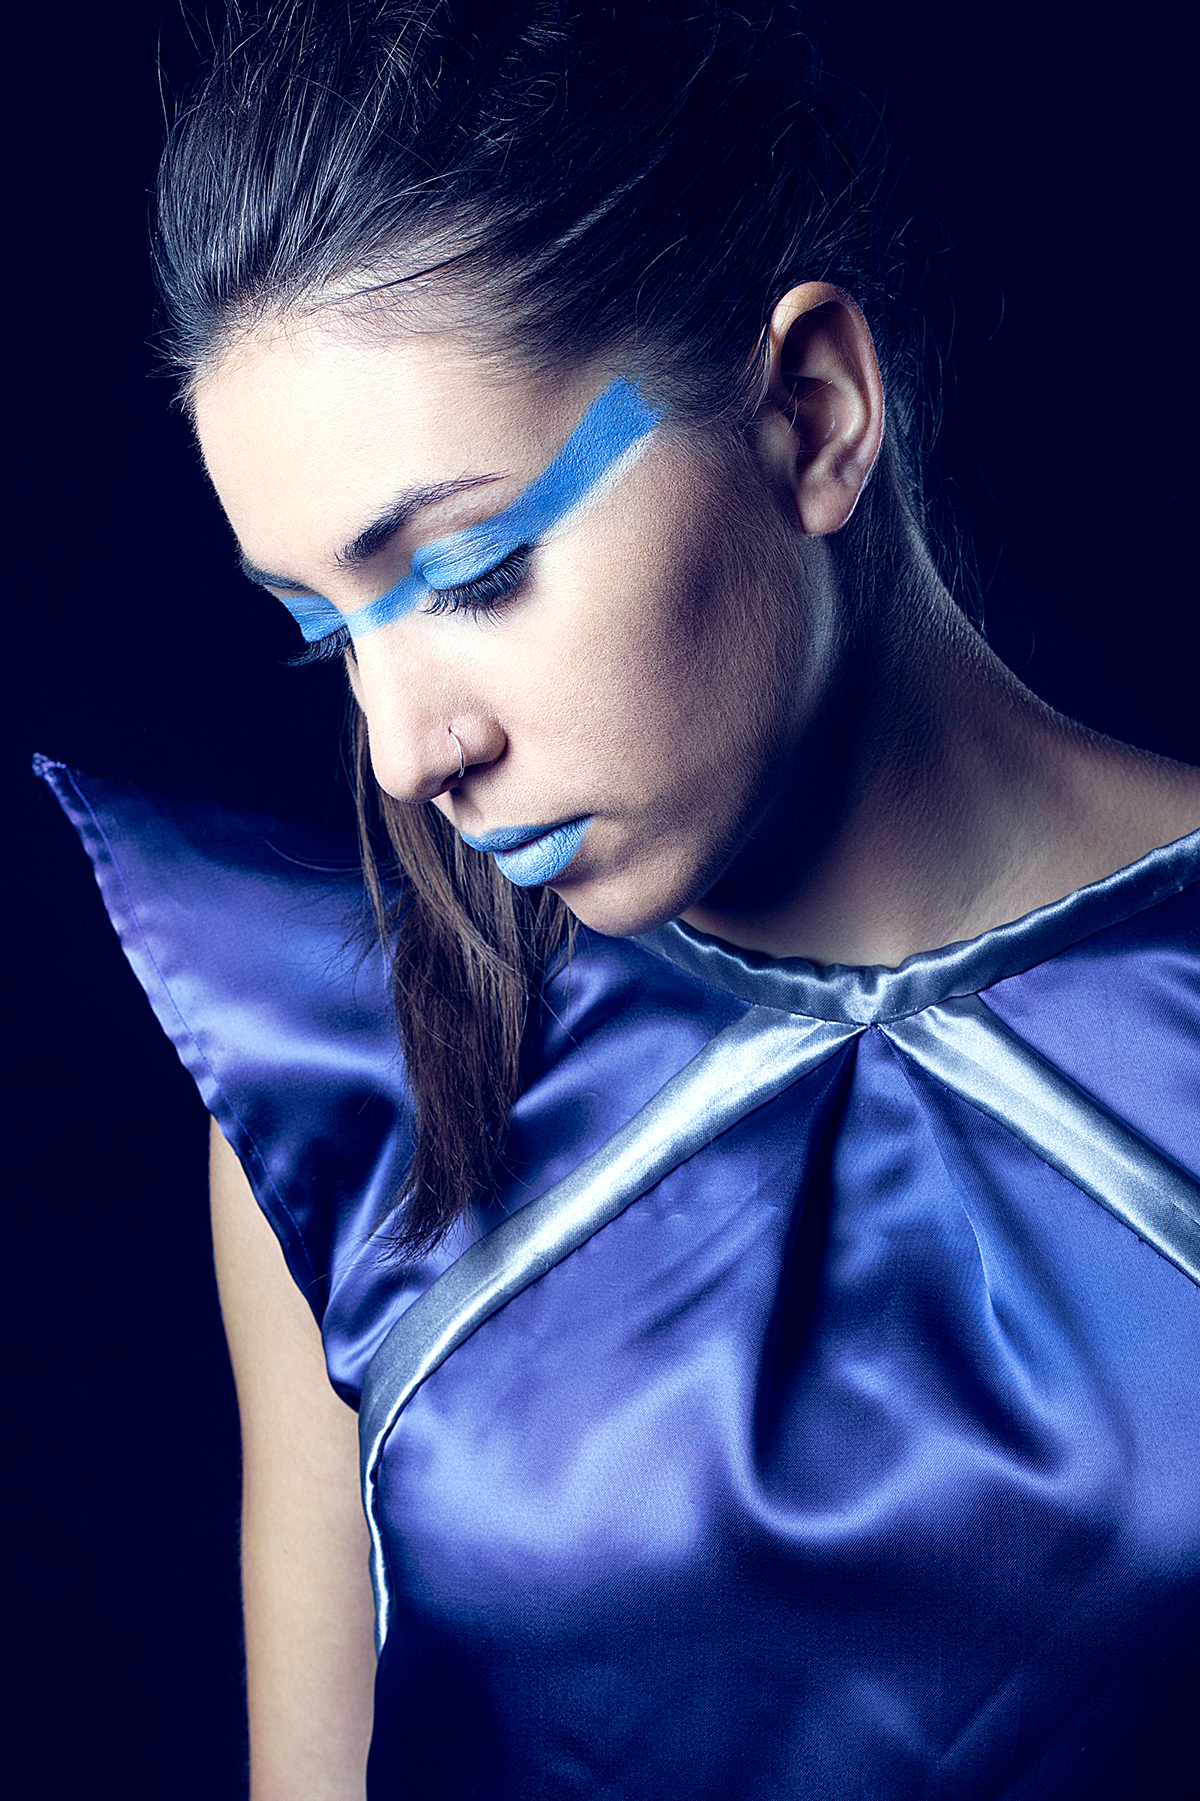 portrait editorial studio future Make Up blue Flash girl woman saturated colors